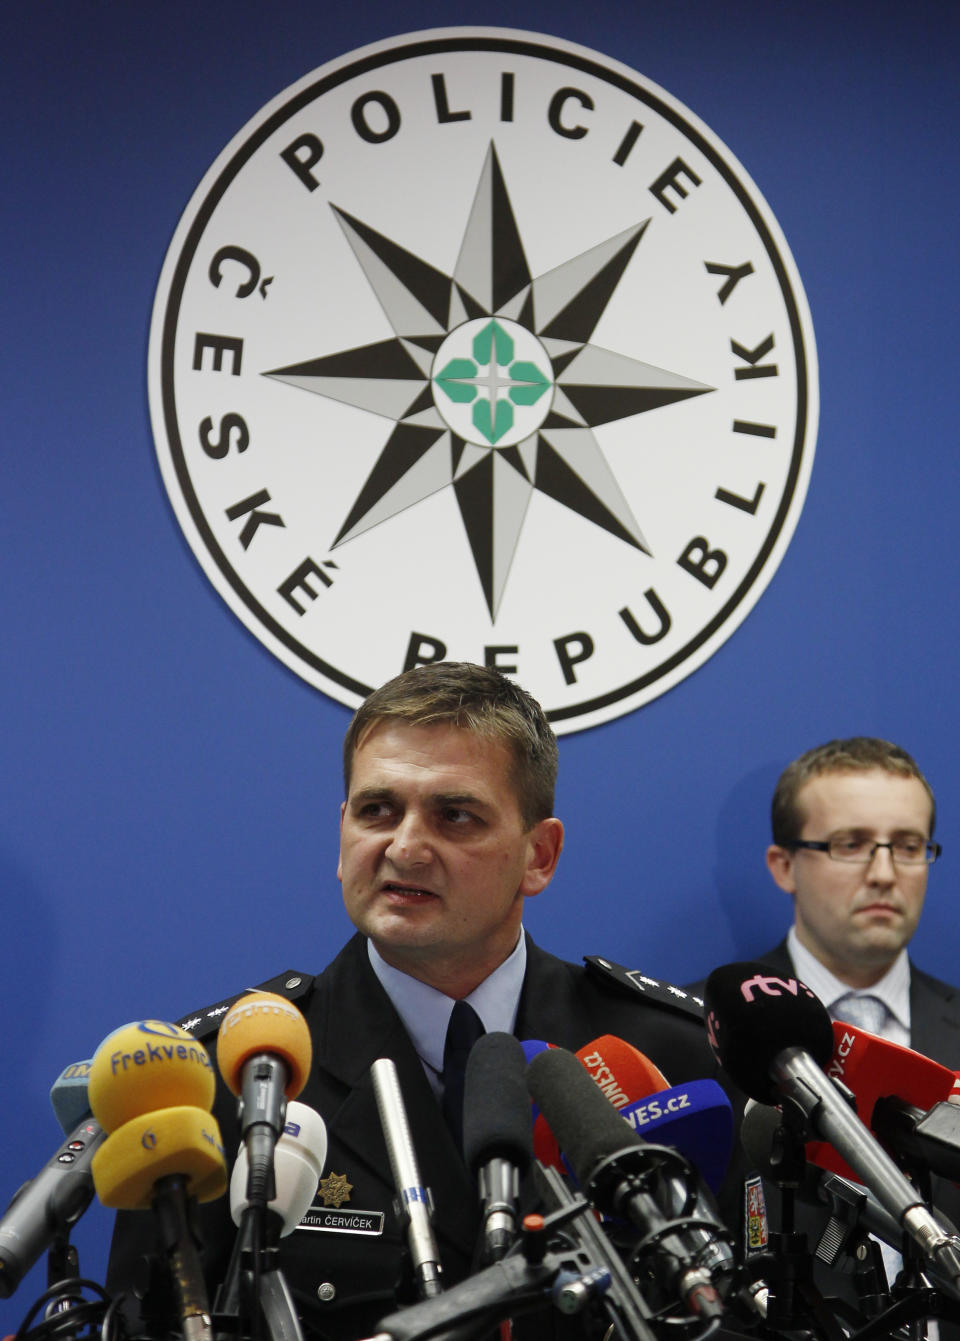 Czech Republic's Police President Martin Cervicek, during a press conference in Prague, Czech Republic, Monday, Sept. 24, 2012. Two people who police believe have been responsible for a wave of methanol poisoning that has killed at least 25 people in the Czech Republic in last two weeks have been arrested, law enforcement officials said on Monday. State prosecutor Roman Kafka said the two persons from the northeastern part of the country are suspected of producing a “brutal blend” of toxic methanol with drinking alcohol, even though they had to know it could seriously damage the life of those who would drink it. (AP Photo/Petr David Josek)